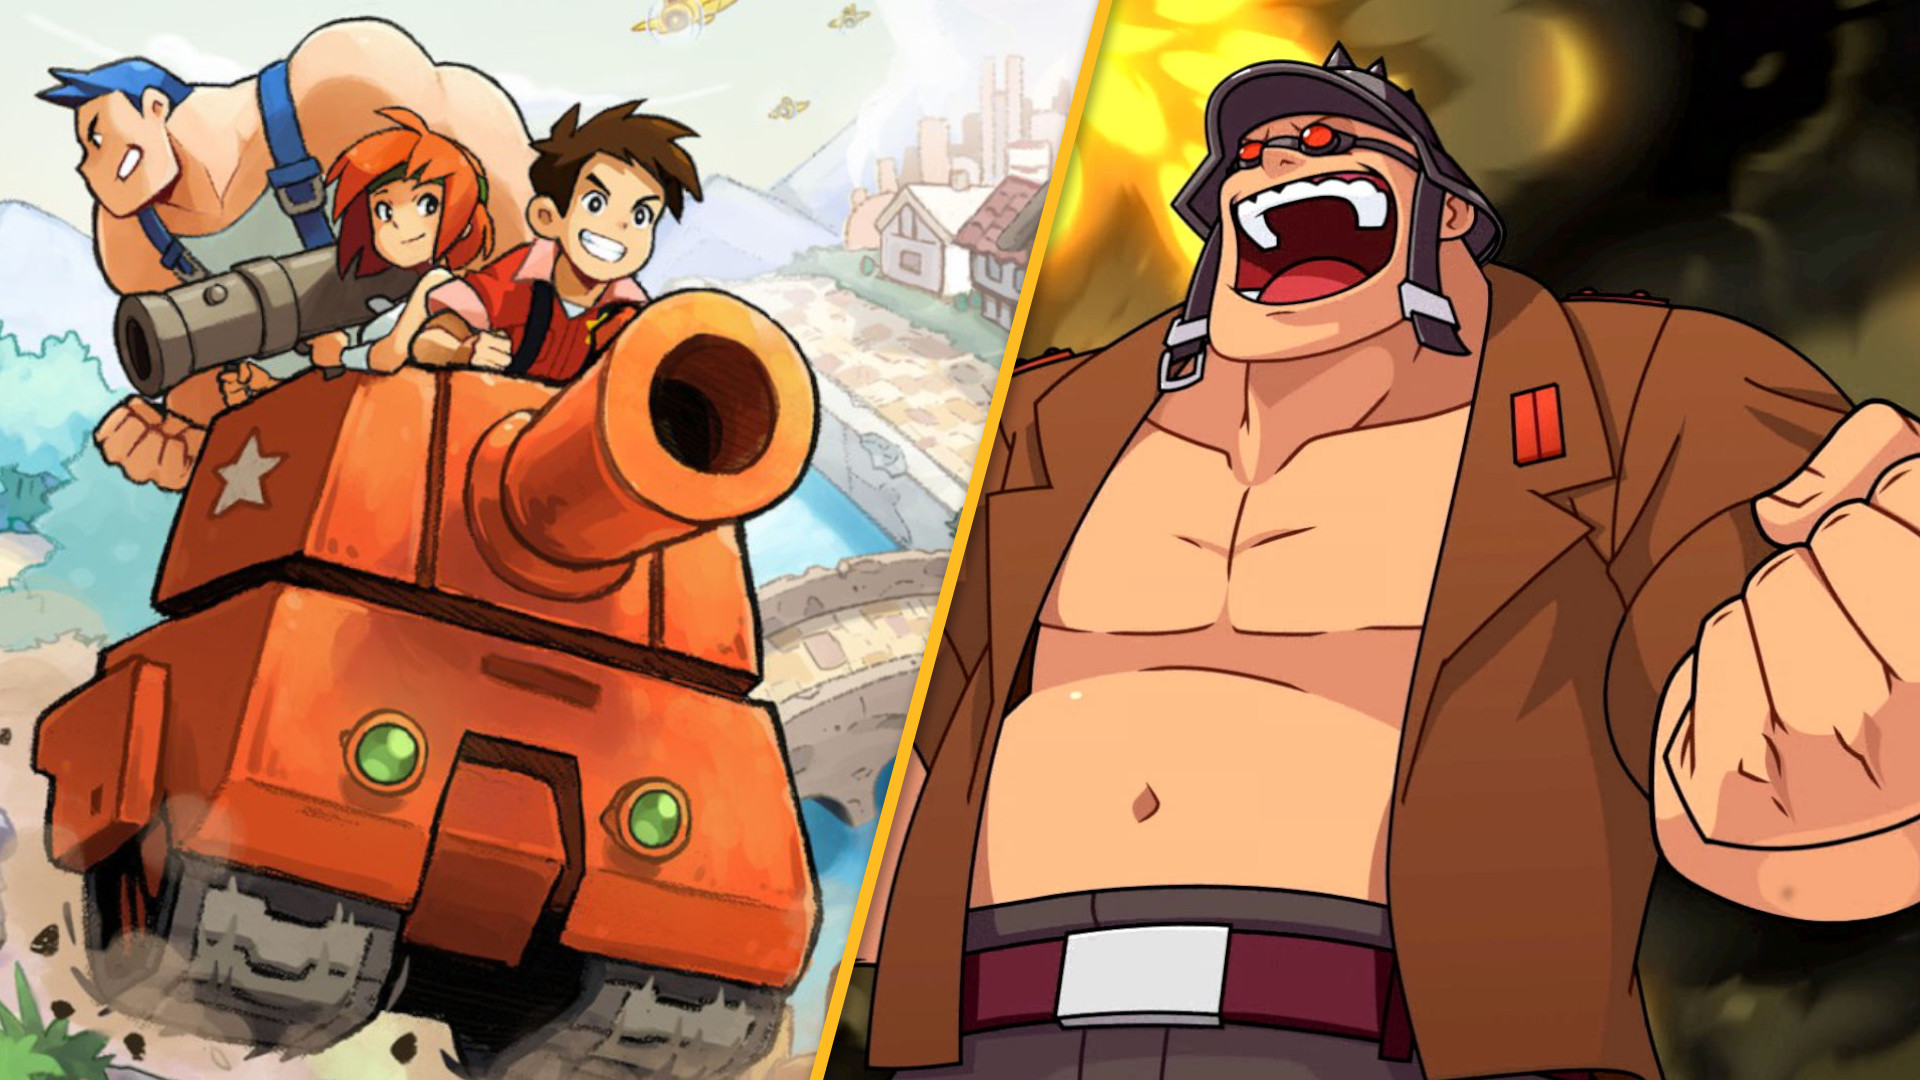 Advance Wars 1 2 Re Boot Camp Release Date Finally Confirmed